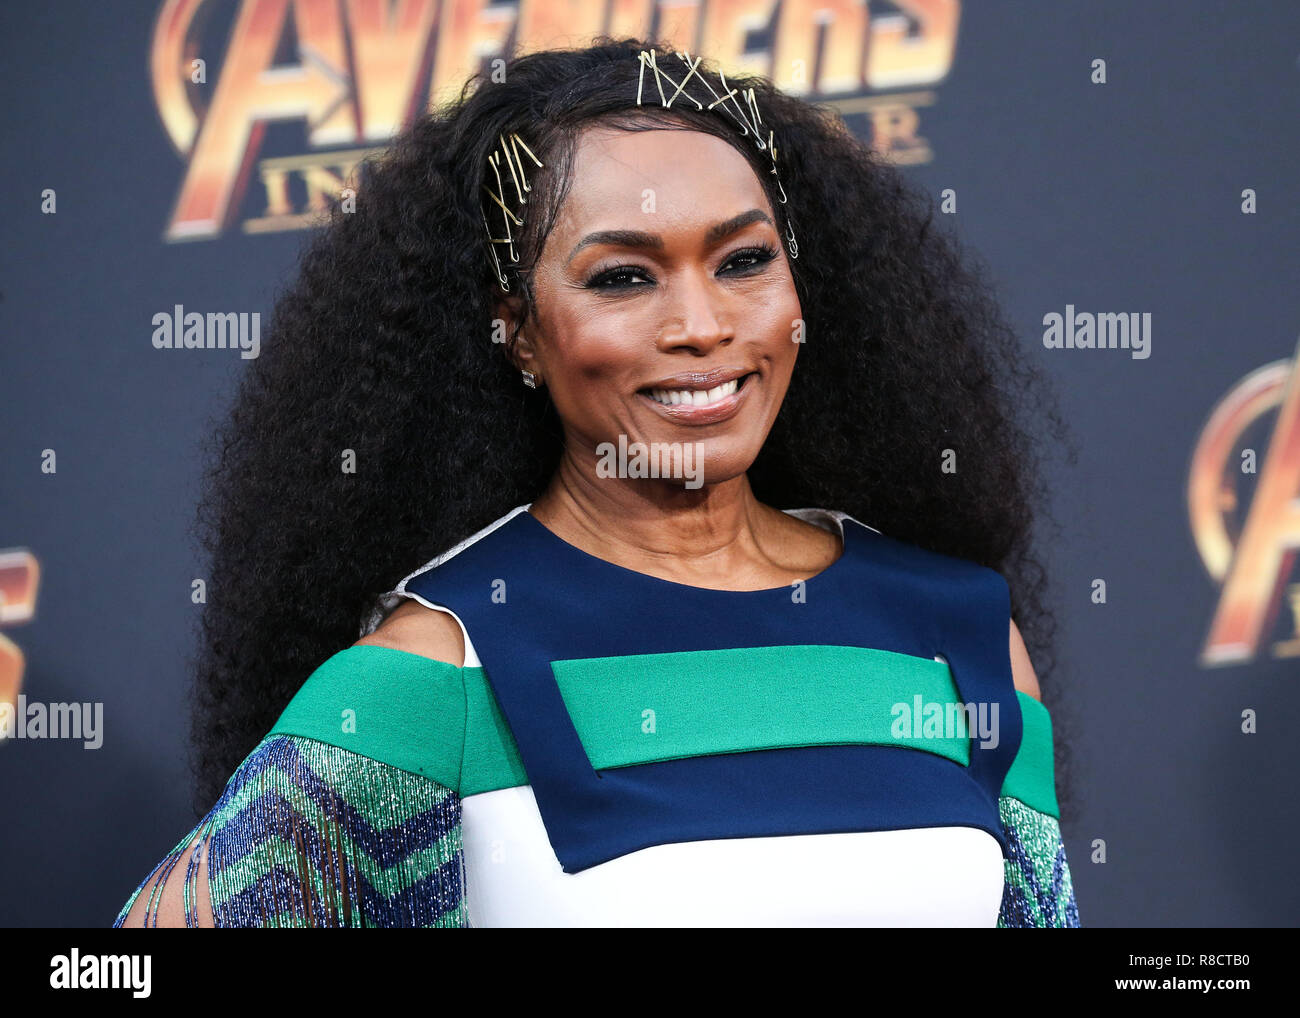 HOLLYWOOD, LOS ANGELES, CA, USA - APRIL 23: Angela Bassett at the World Premiere Of Disney And Marvel's 'Avengers: Infinity War' held at the El Capitan Theatre, Dolby Theatre and TCL Chinese Theatre IMAX on April 23, 2018 in Hollywood, Los Angeles, California, United States. (Photo by Xavier Collin/Image Press Agency) Stock Photo